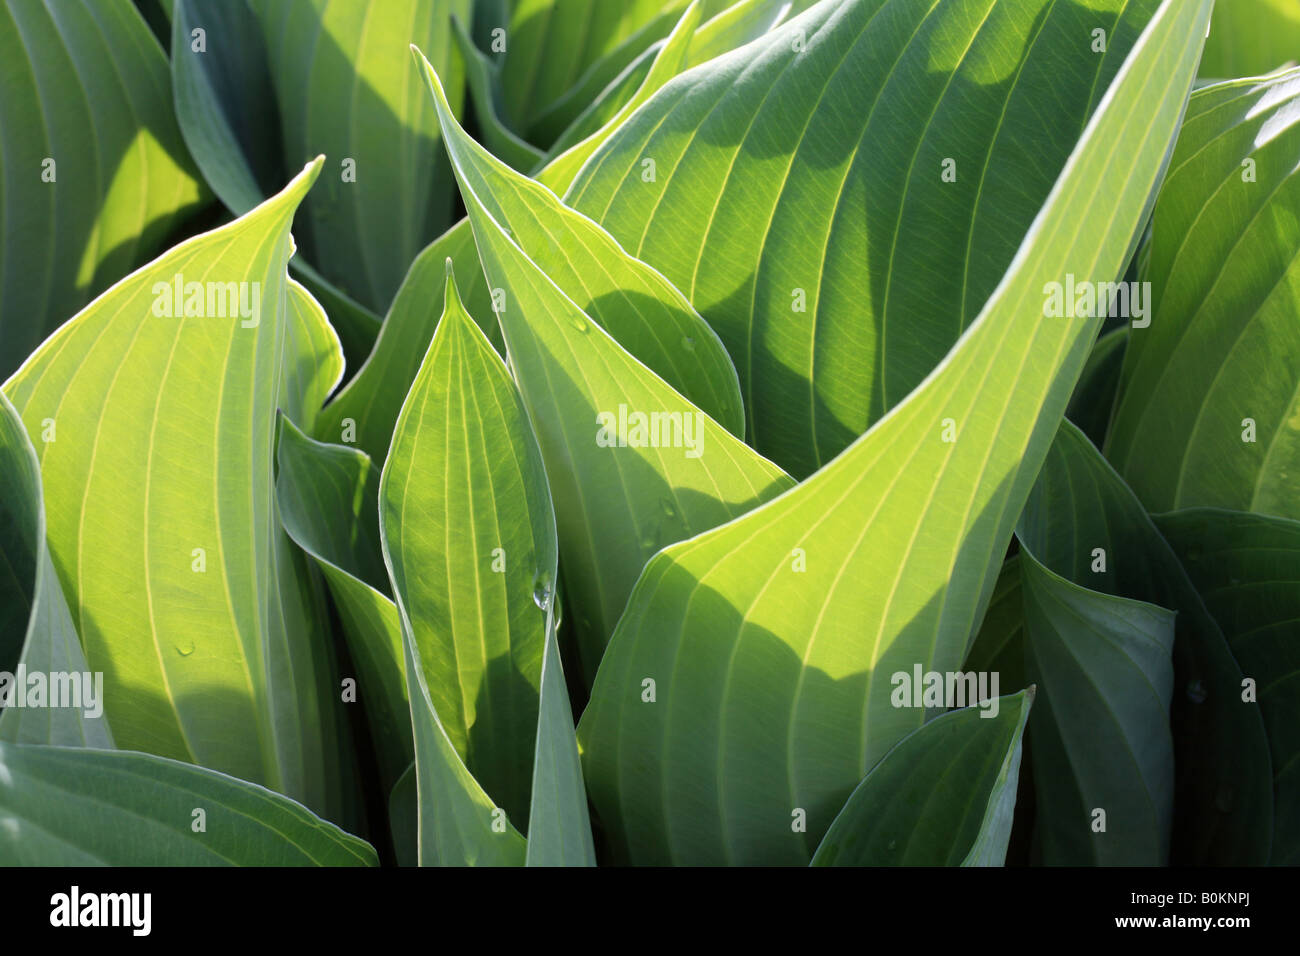 Hosta leaves 'Plantain lily' close up, green leaves with distinct veins. Stock Photo